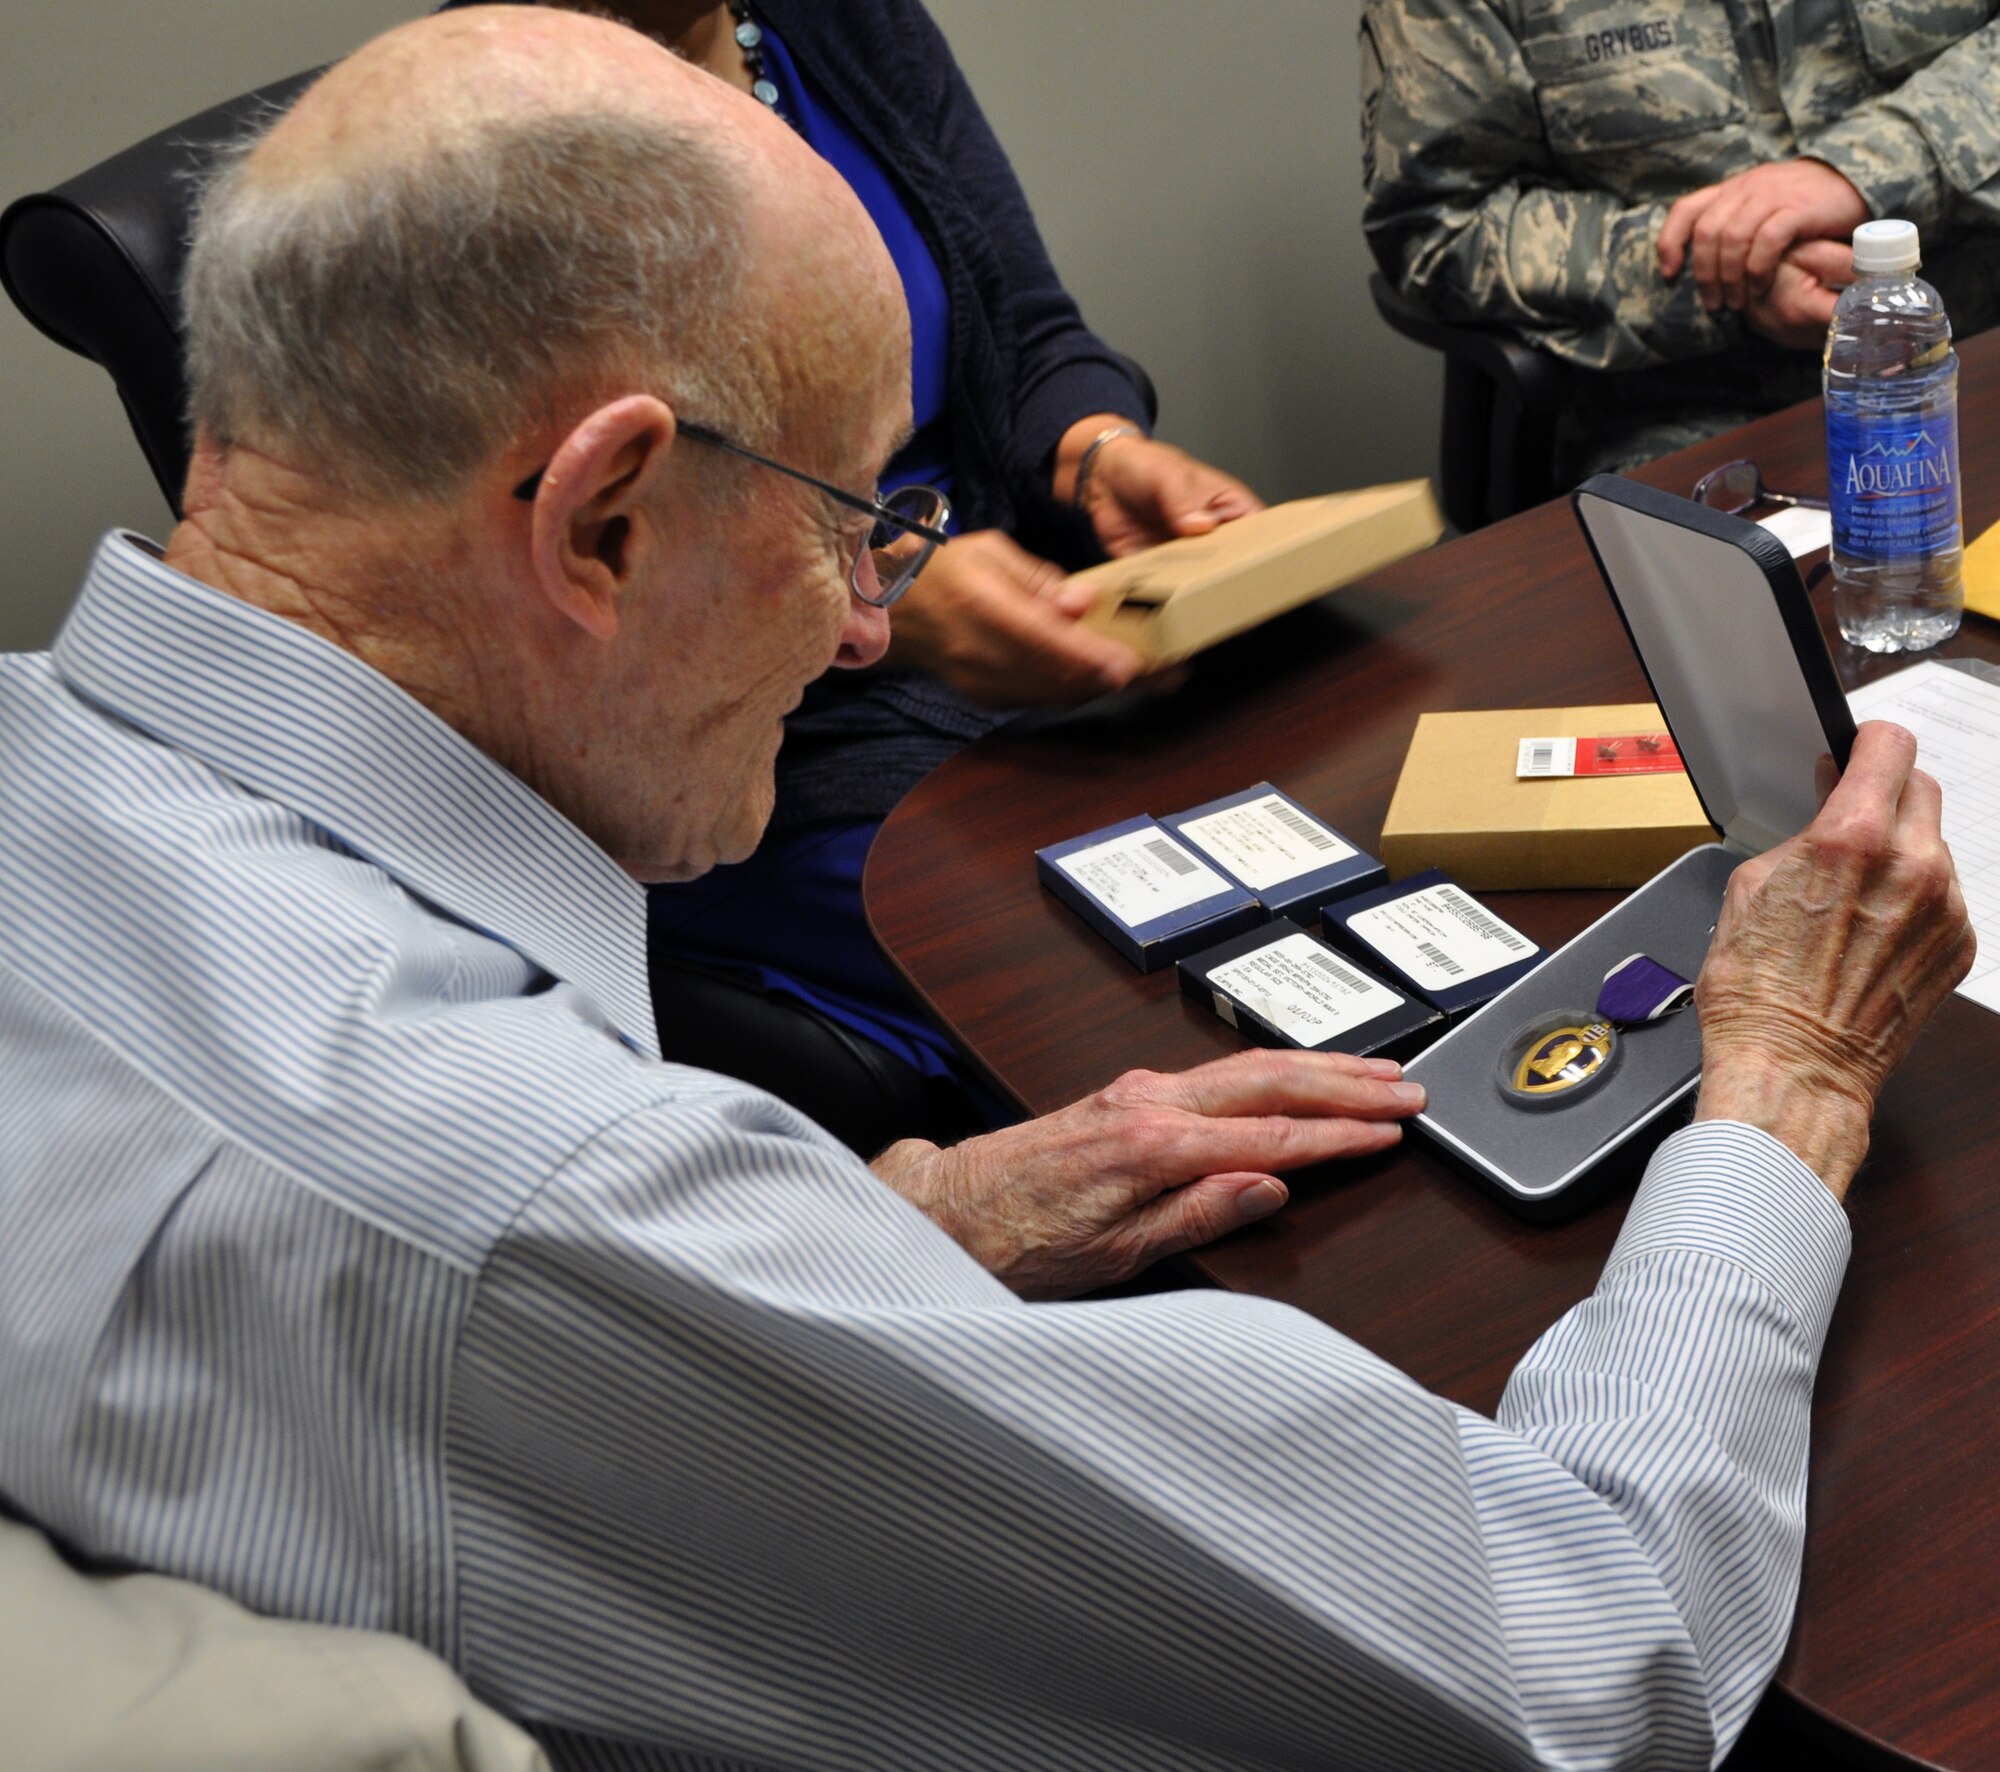 Former 1st Lt. Clayton A. Nattier, a veteran bomber pilot who was held as a prisoner of war during World War II, takes a look at the Purple Heart Medal received from the Air Reserve Personnel Center April 17, 2015, on Buckley Air Force Base, Colo. Nattier visited ARPC to receive his POW Medal among various other medals, then took time to personally meet and thank the members on the recognition service team who assisted him. Members from the ARPC recognition service team who assisted him are: retired Brig. Gen. Pat Quisenberry, evaluations branch chief, Jacqueline Bing, sustainment division chief, Master Sgt. Jeremy Bohn, pre-trained individual manpower division chief, and Master Sgt. Richard Grybos, NCO in charge of training and development. Nattier worked in conjunction with retired Lt. Col. Kathryn Wirkus, a constituent service representative from U.S. representative Ed Perlmutter’s staff, to attain his POW Medal. A formal presentation to award the POW Medal to Nattier is currently being planned by U.S. representative Ed Perlmutter’s office. (U.S. Air Force photo/Tech. Sgt. Rob Hazelett)